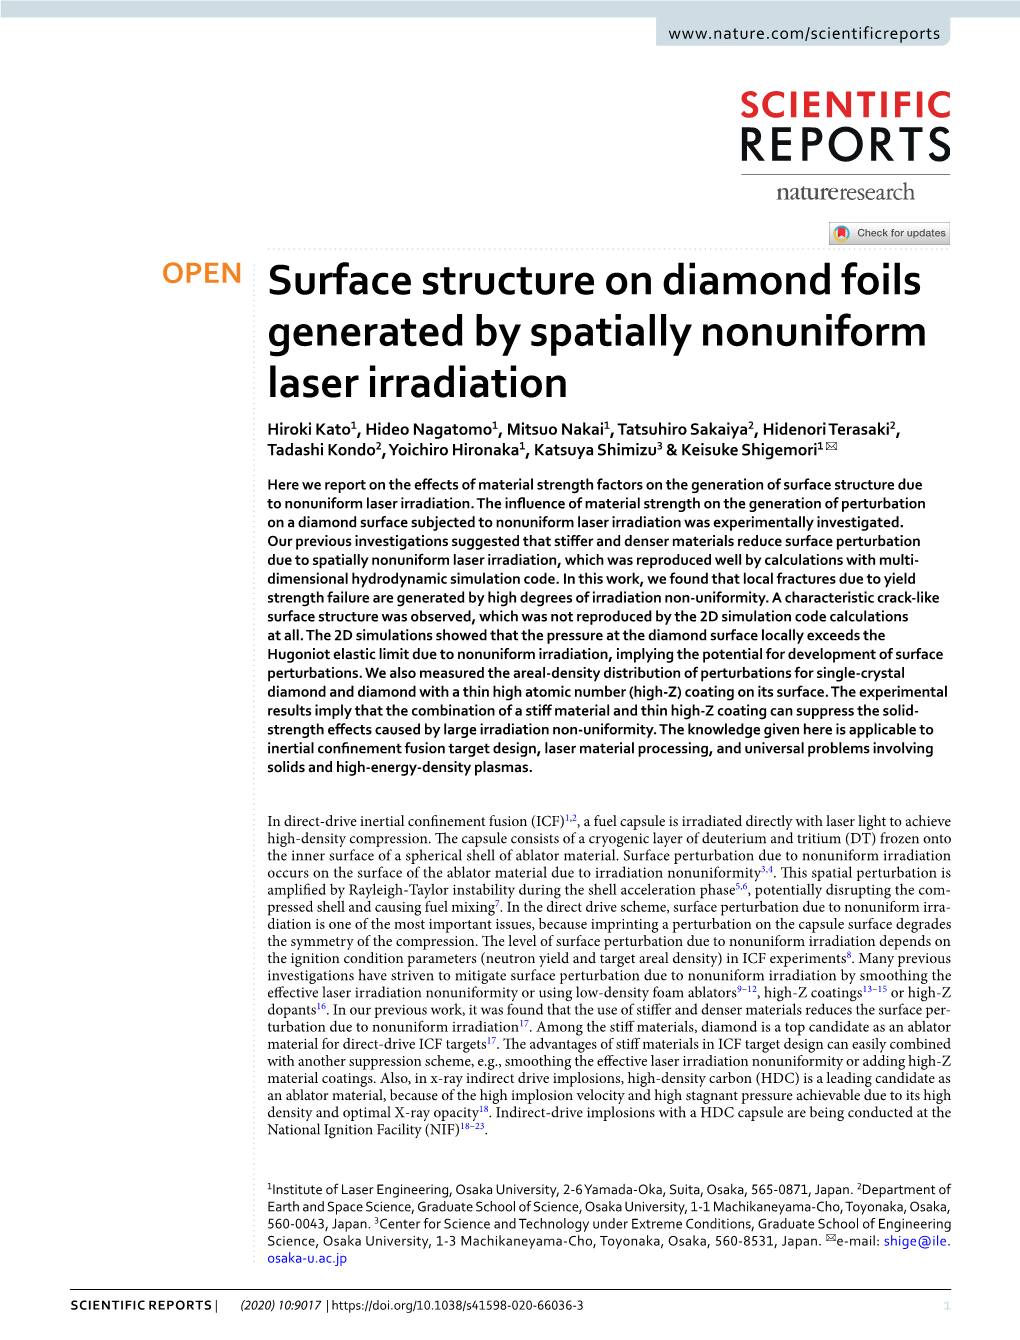 Surface Structure on Diamond Foils Generated by Spatially Nonuniform